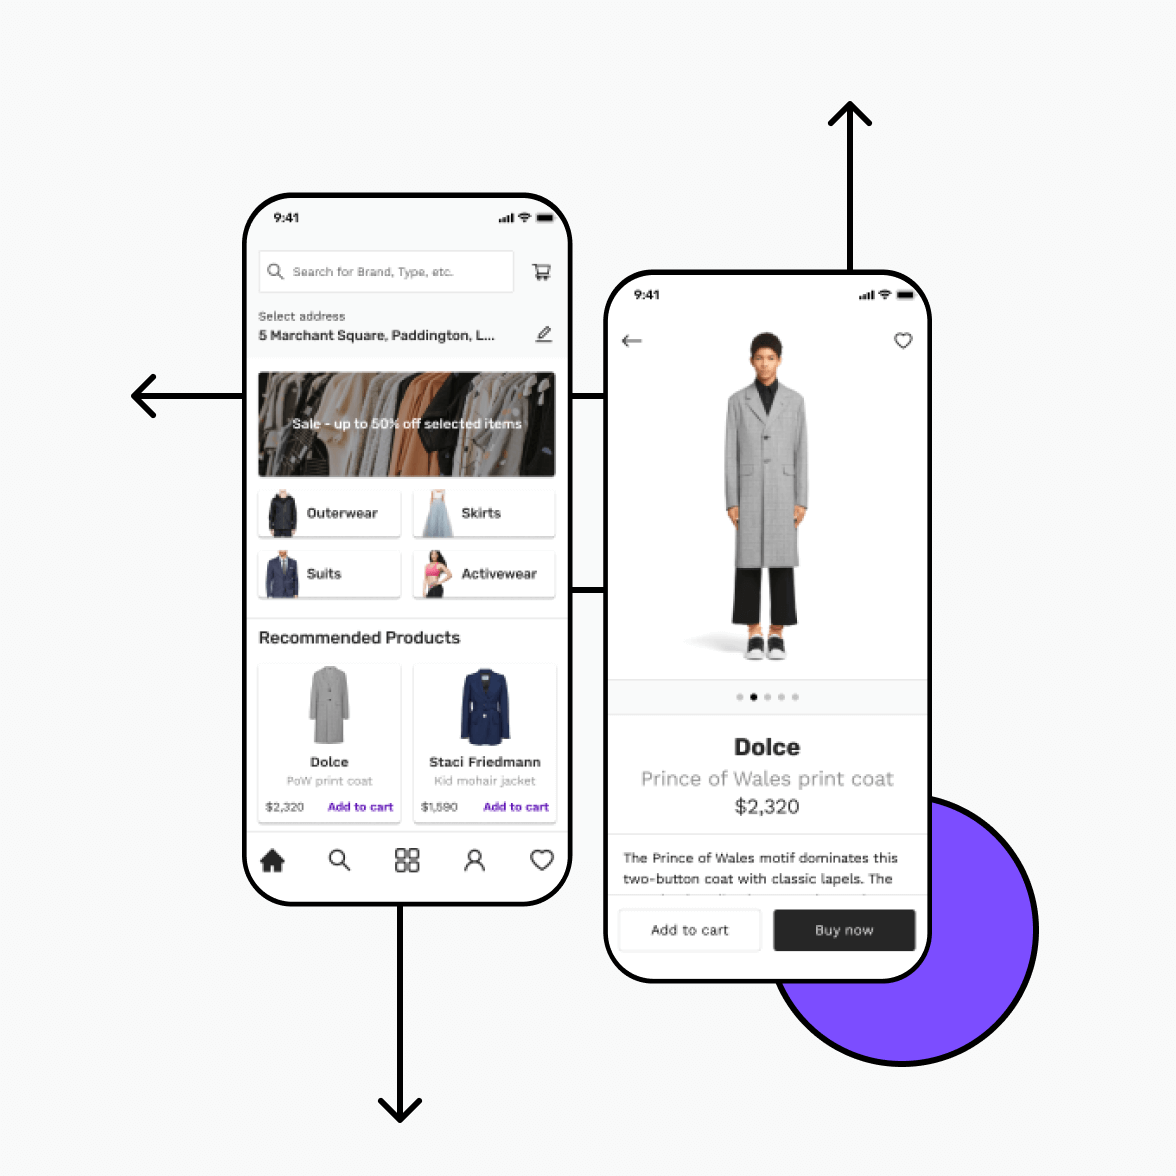 Retail app screens with categories and product details